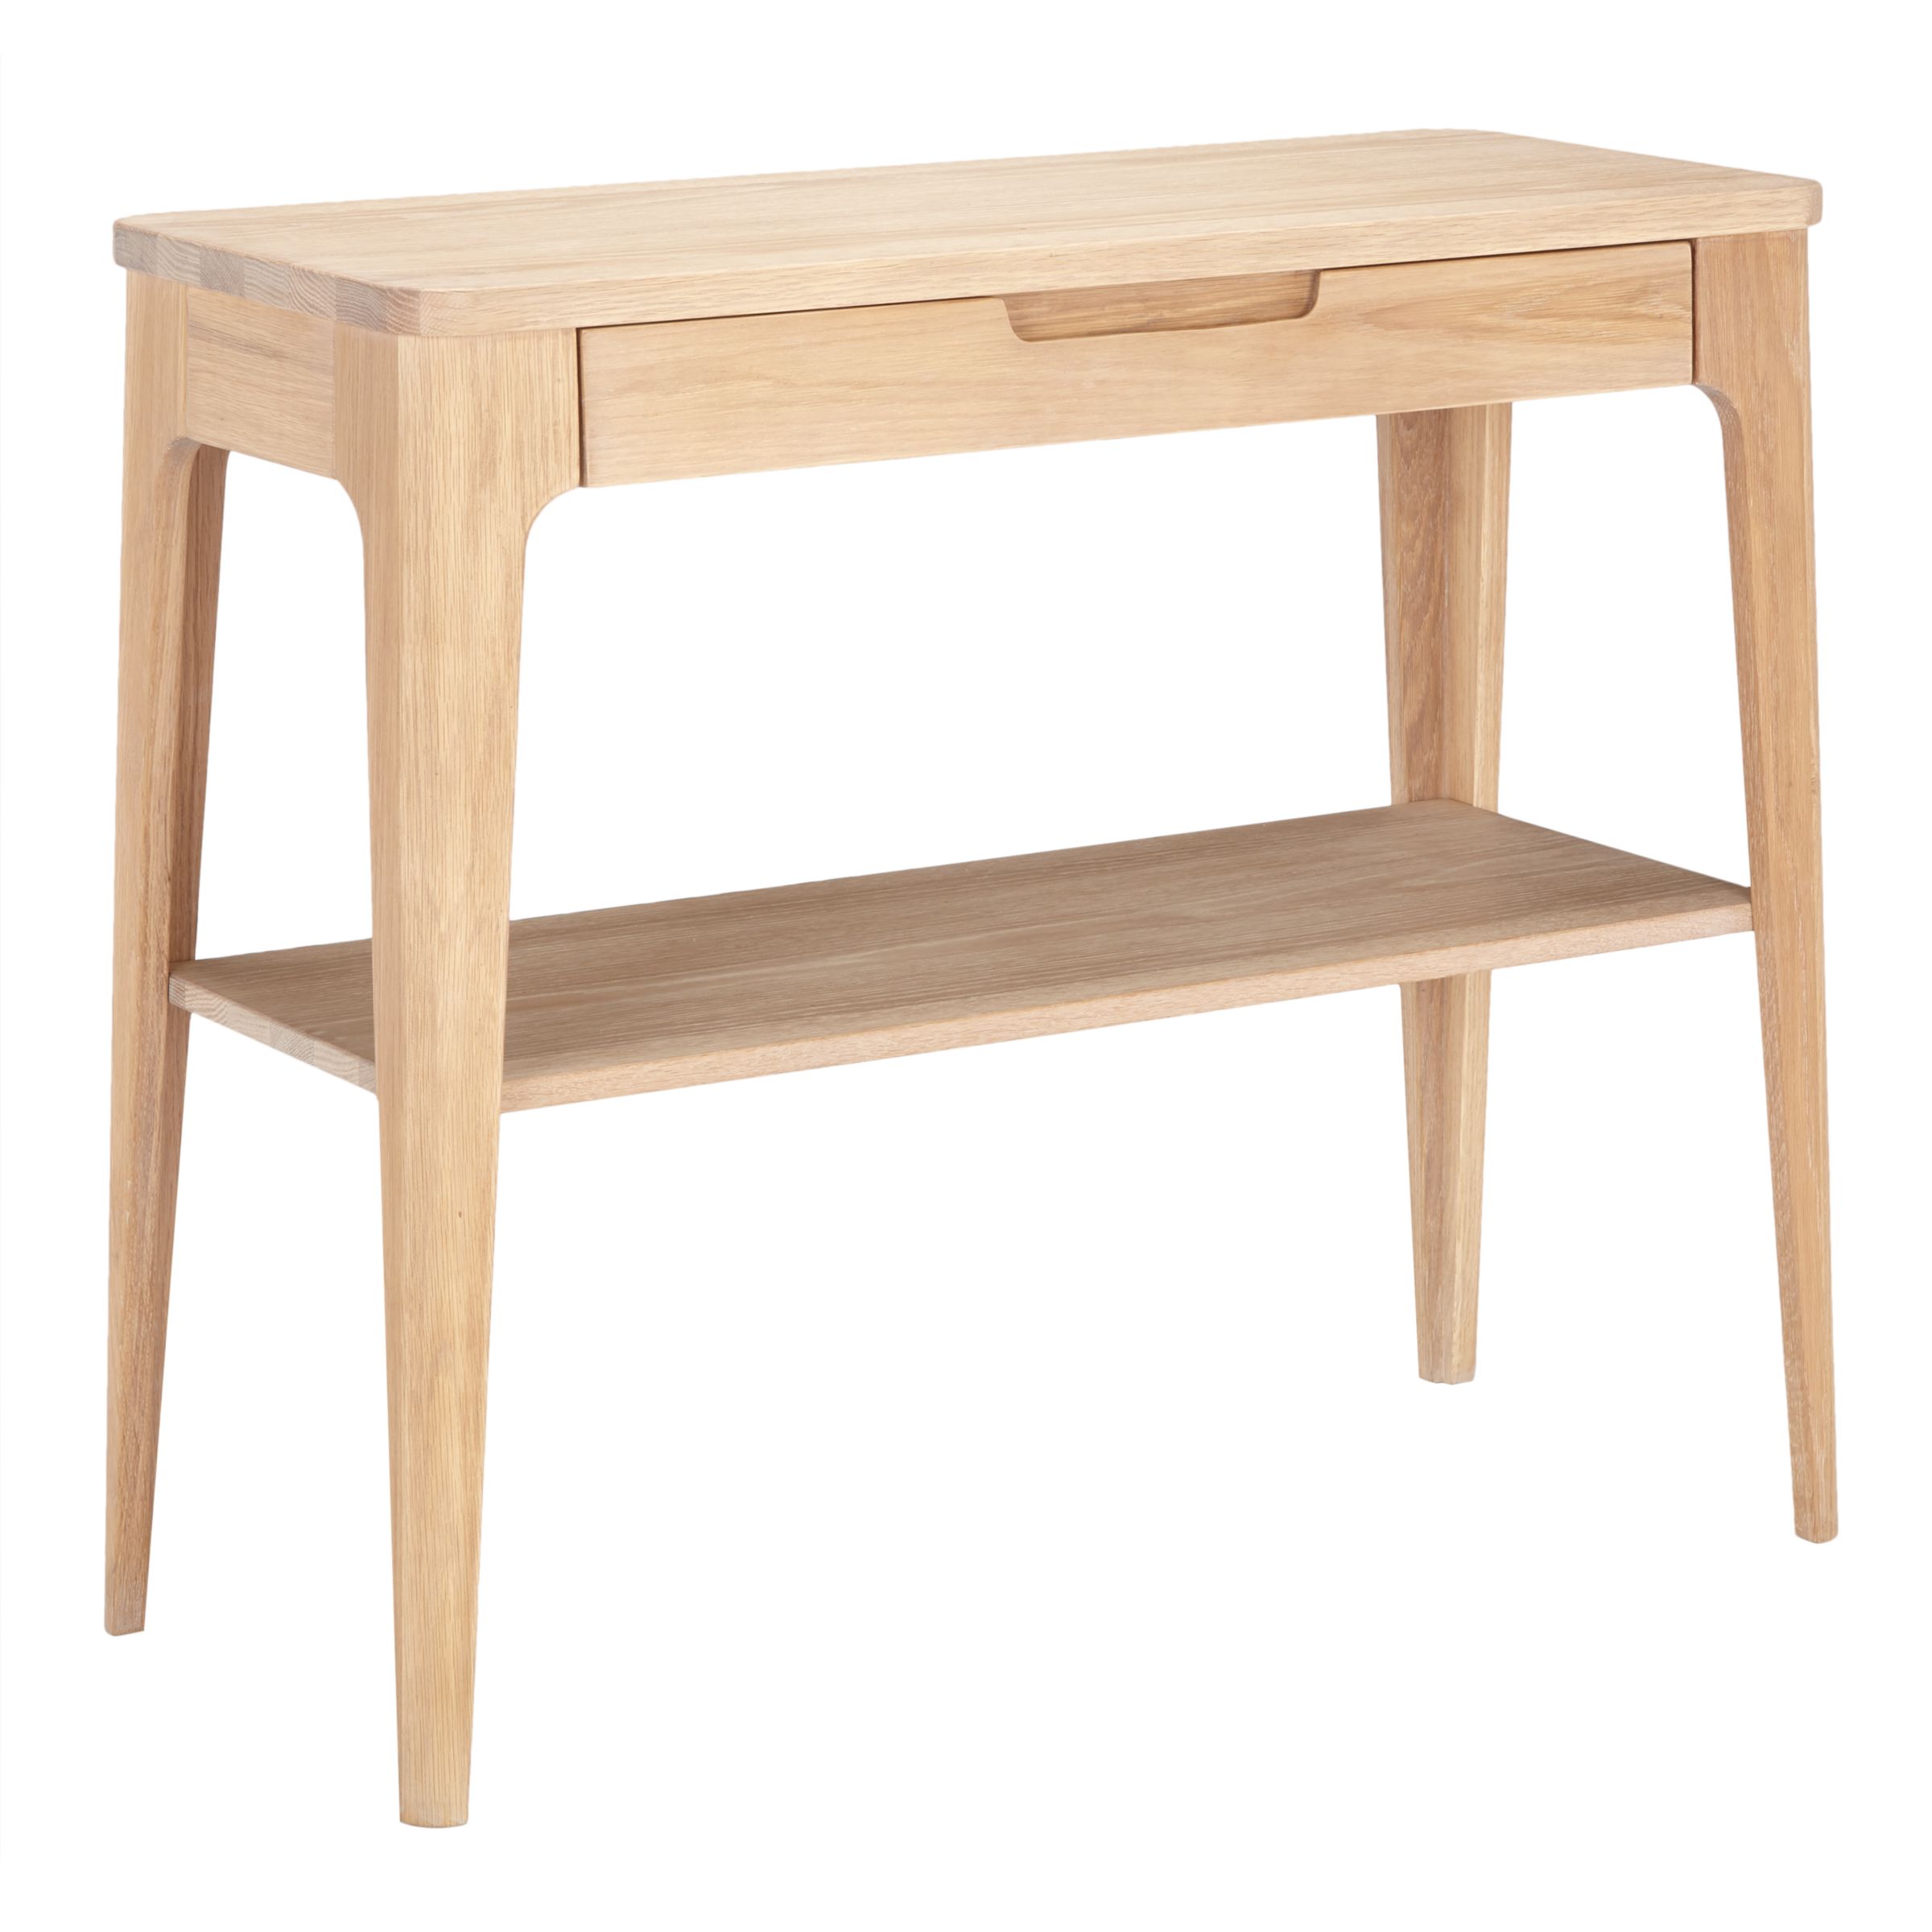 Photo of Ebbe gehl for john lewis mira console table